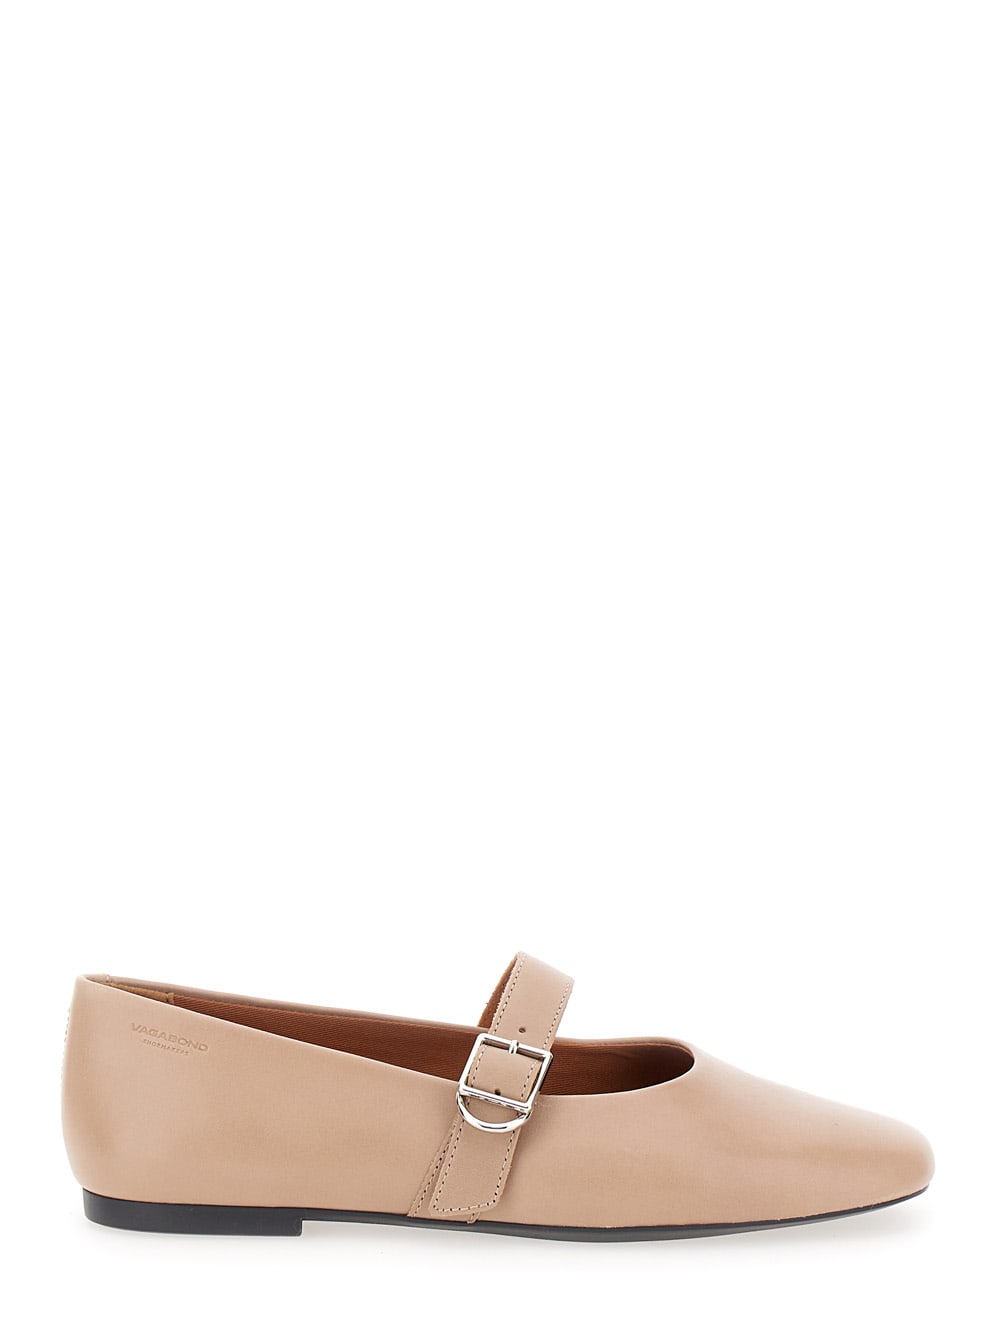 VAGABOND JOLIN BEIGE BALLET FLATS WITH STRAP IN SMOOTH LEATHER WOMAN